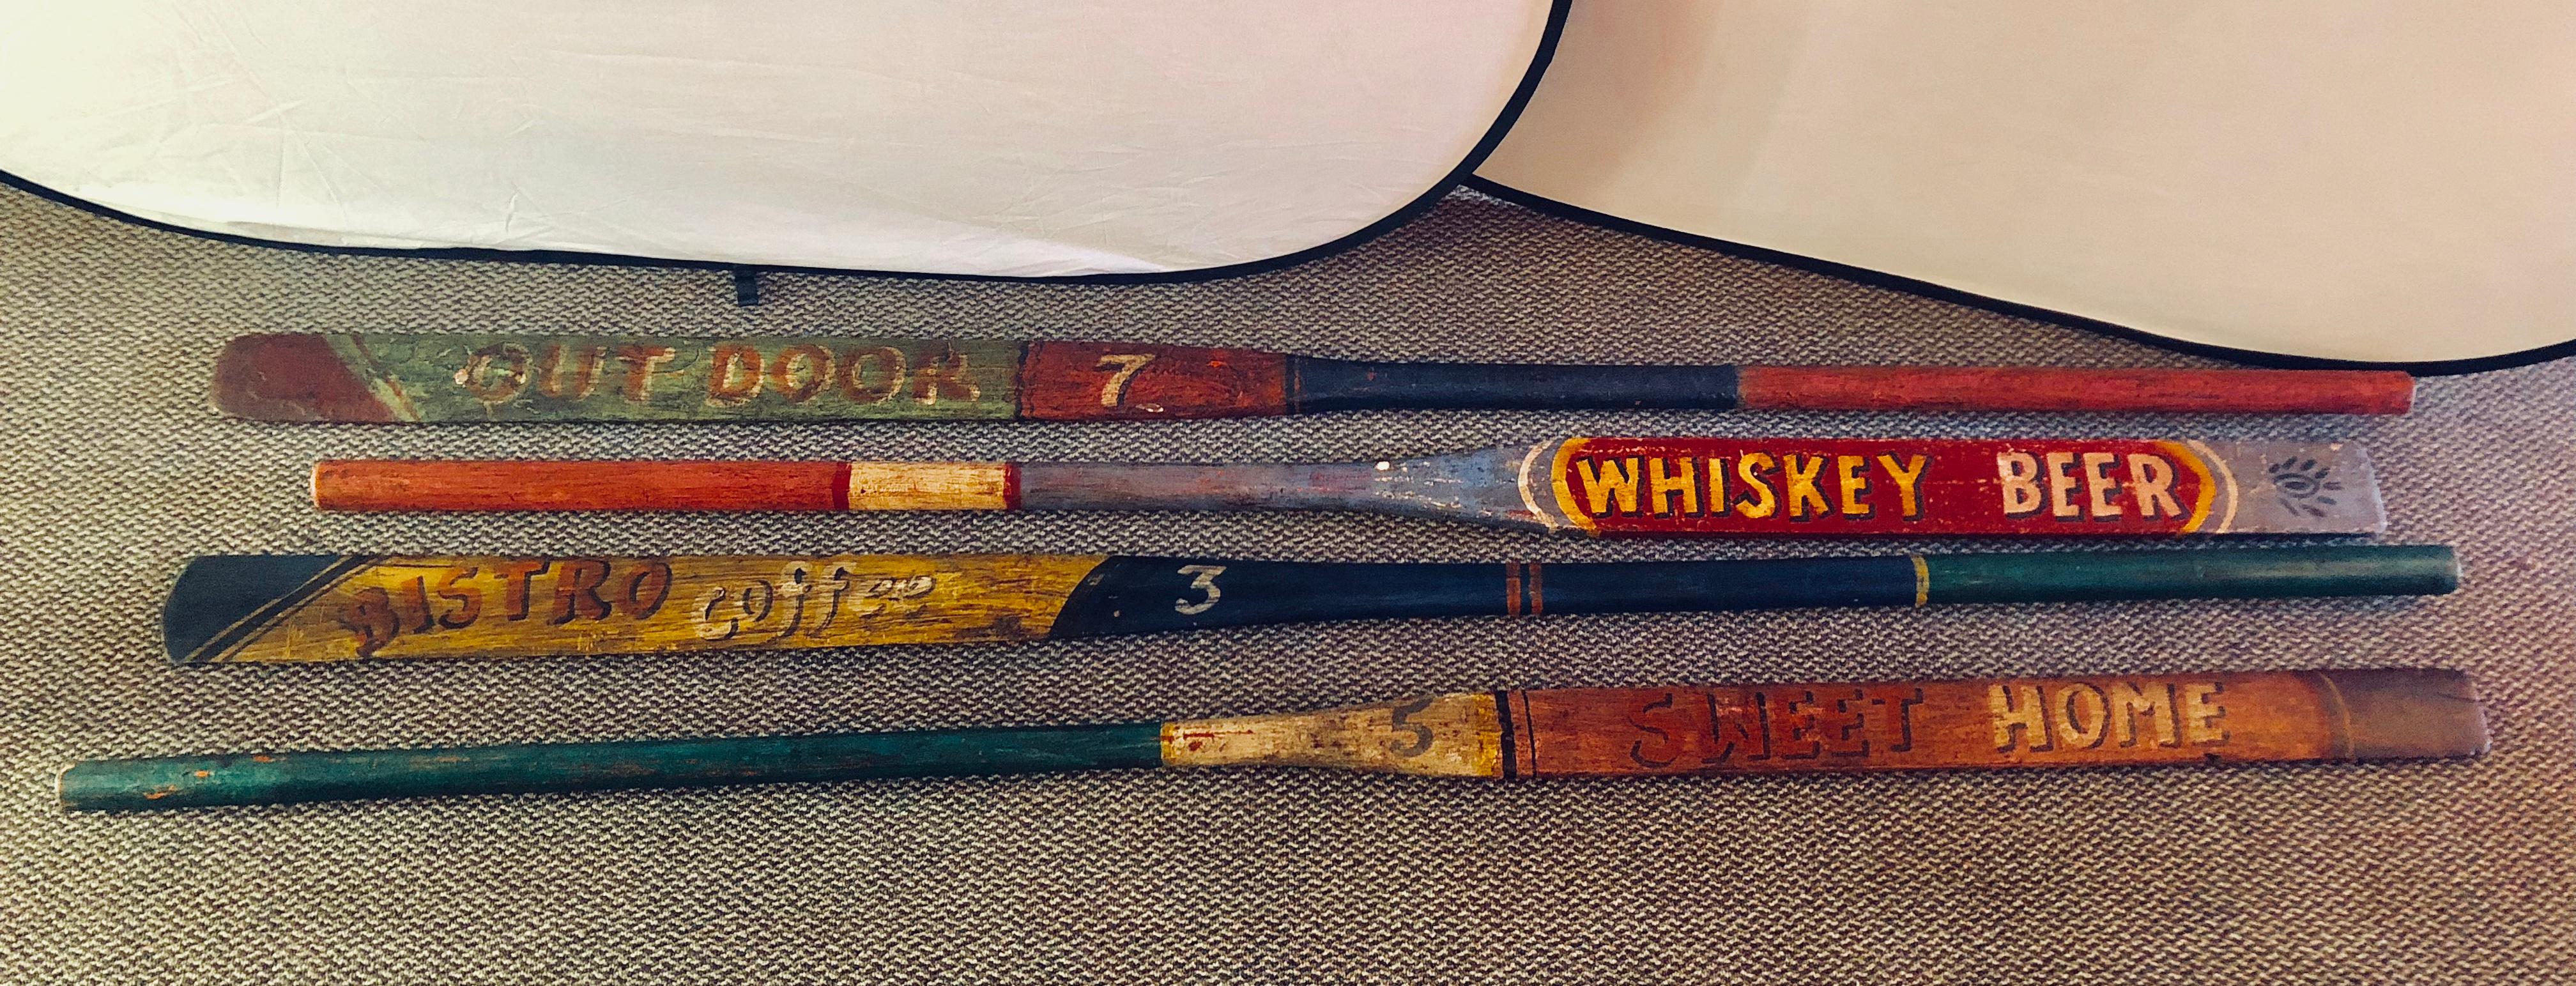 Set of 2 hand painted inspirational rowing oars or paddles. Priced individually. Each in a rustic painted design having inspirational writings.

Only two left: 